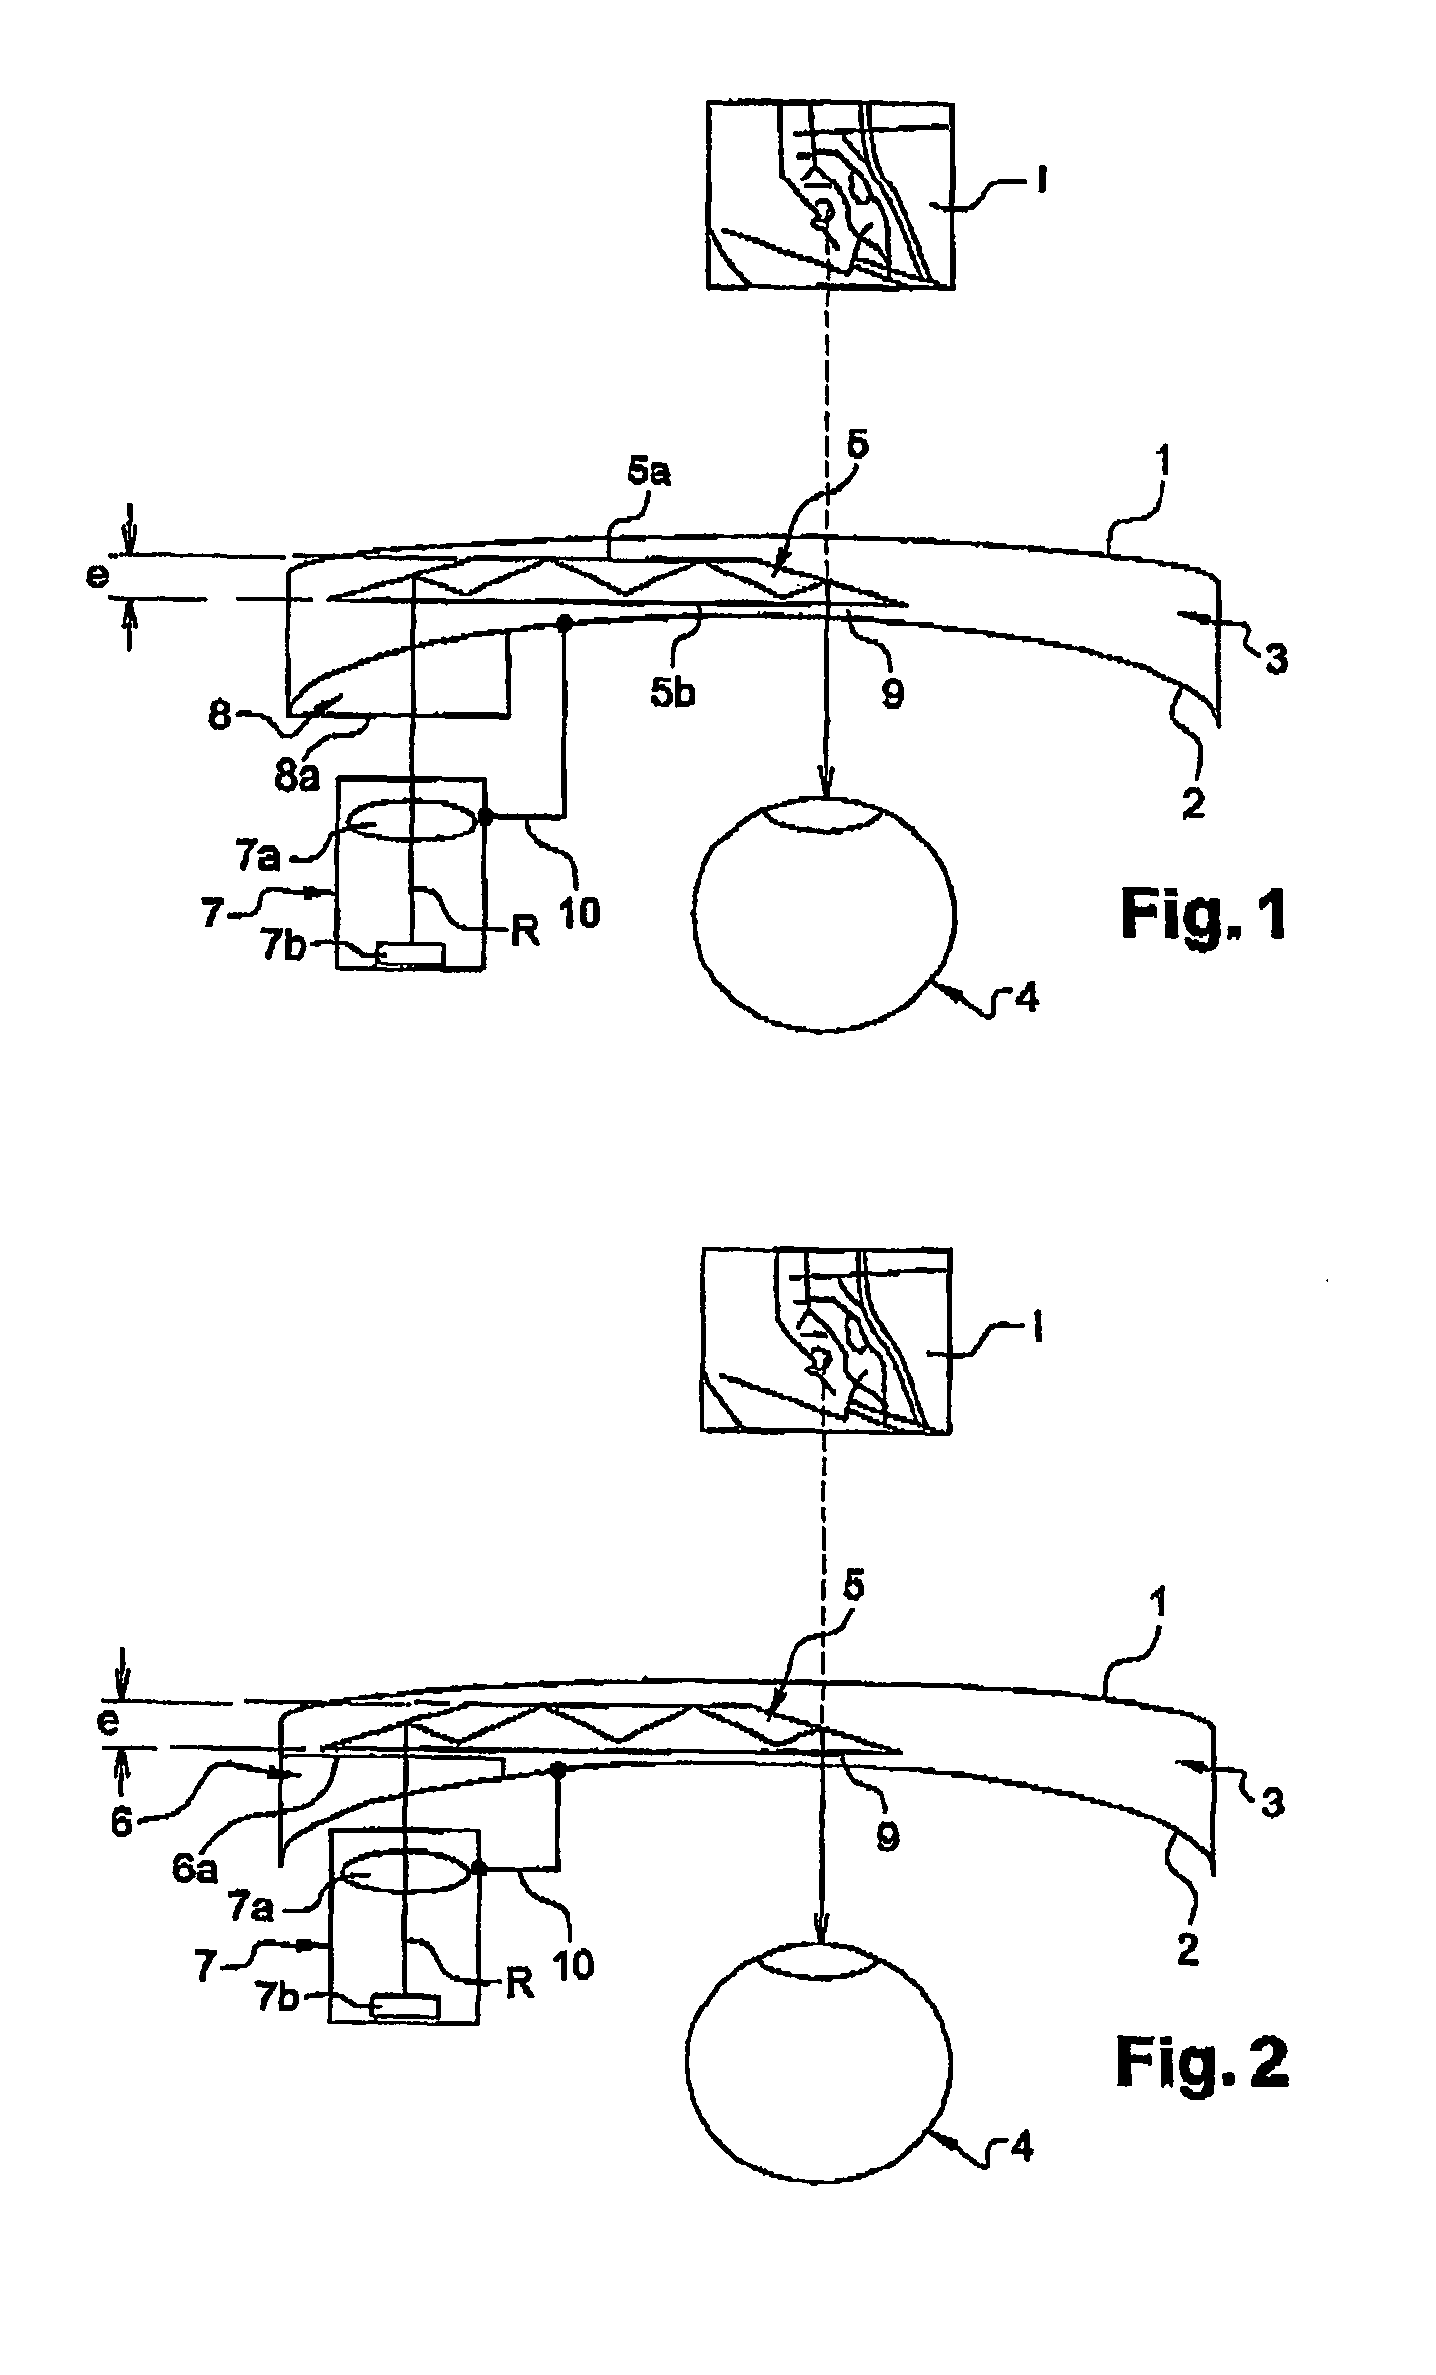 Method of manufacturing an ophthalmic lens for providing an optical display